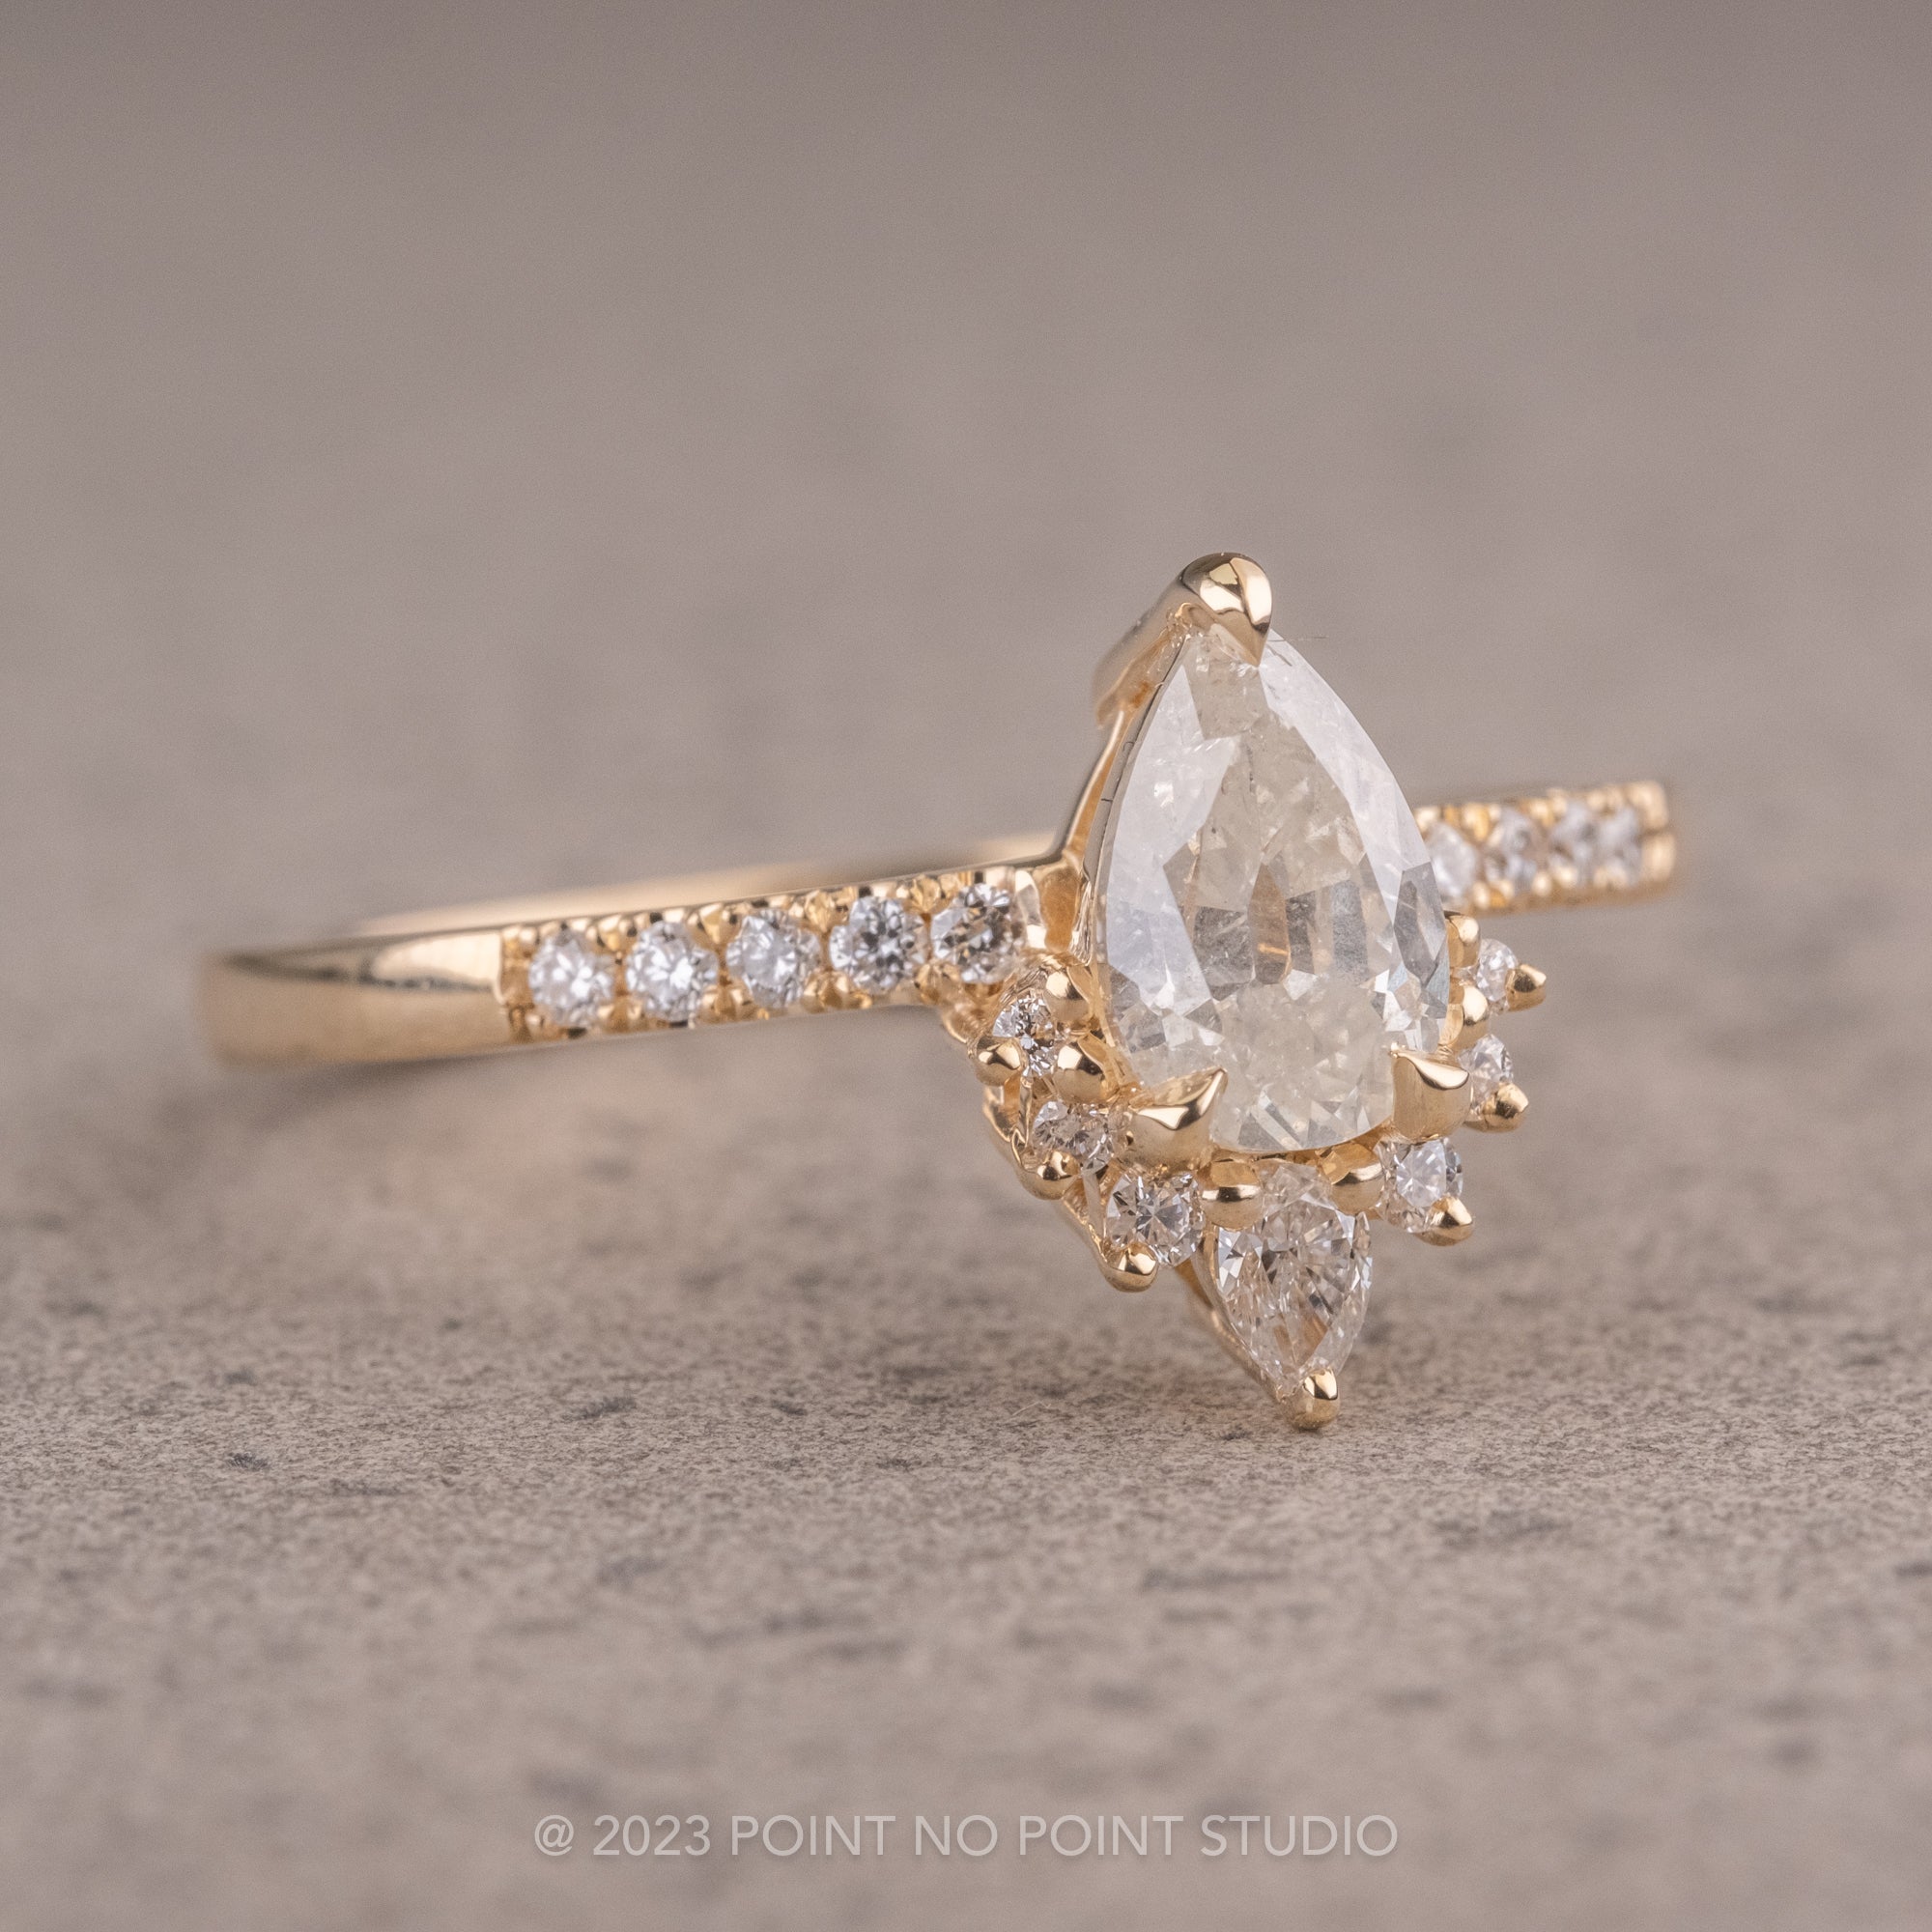 Icy White Pear Diamond Engagement Ring, Point No Point Studio 9.75